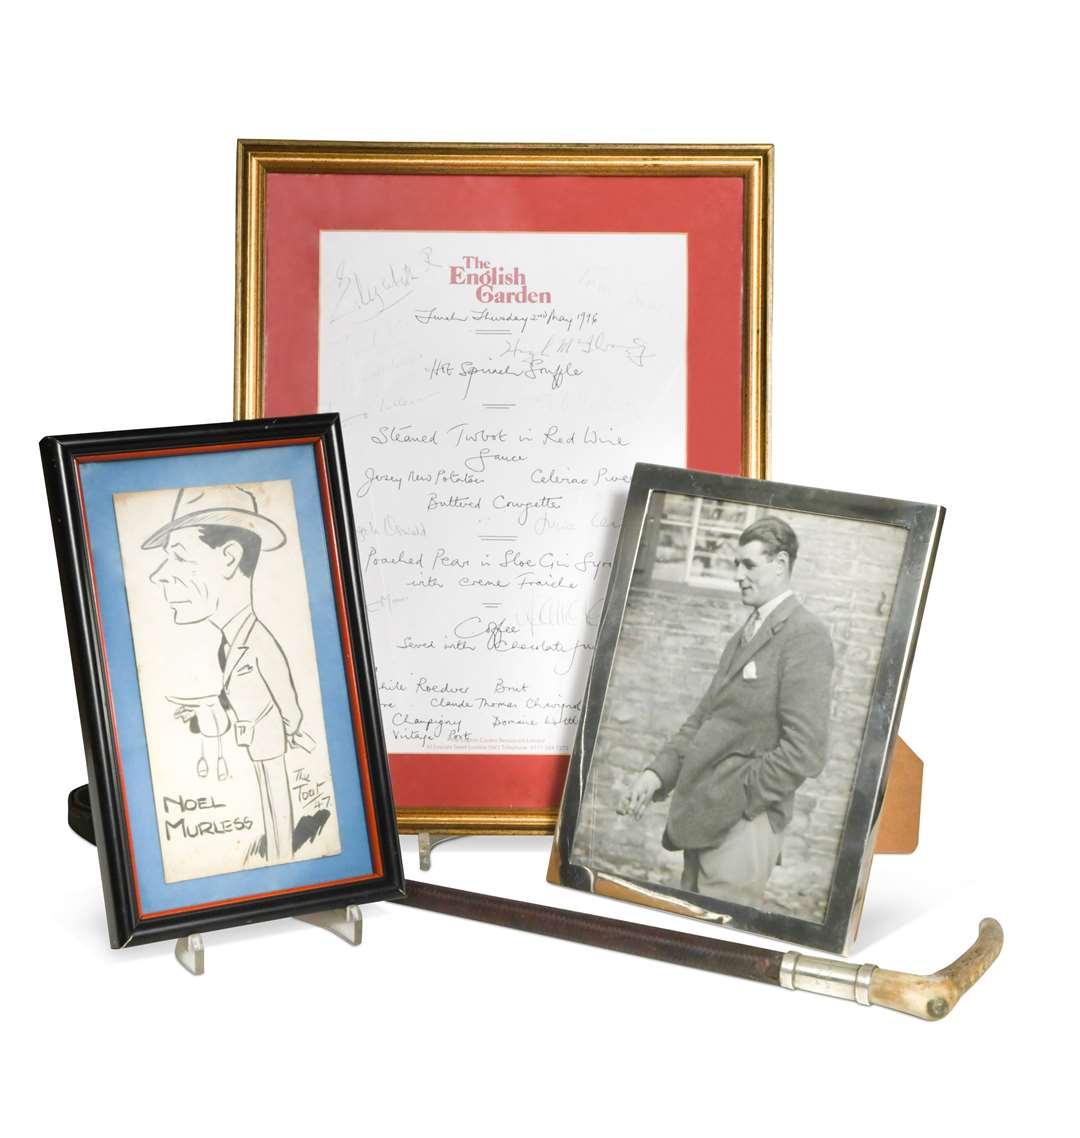 Lot 630, which includes a riding crop with an engraved silver collar and a signed menu from The English Garden from Thursday 2nd May 1996, signed by H.M. Queen Elizabeth II. Picture: Cheffins